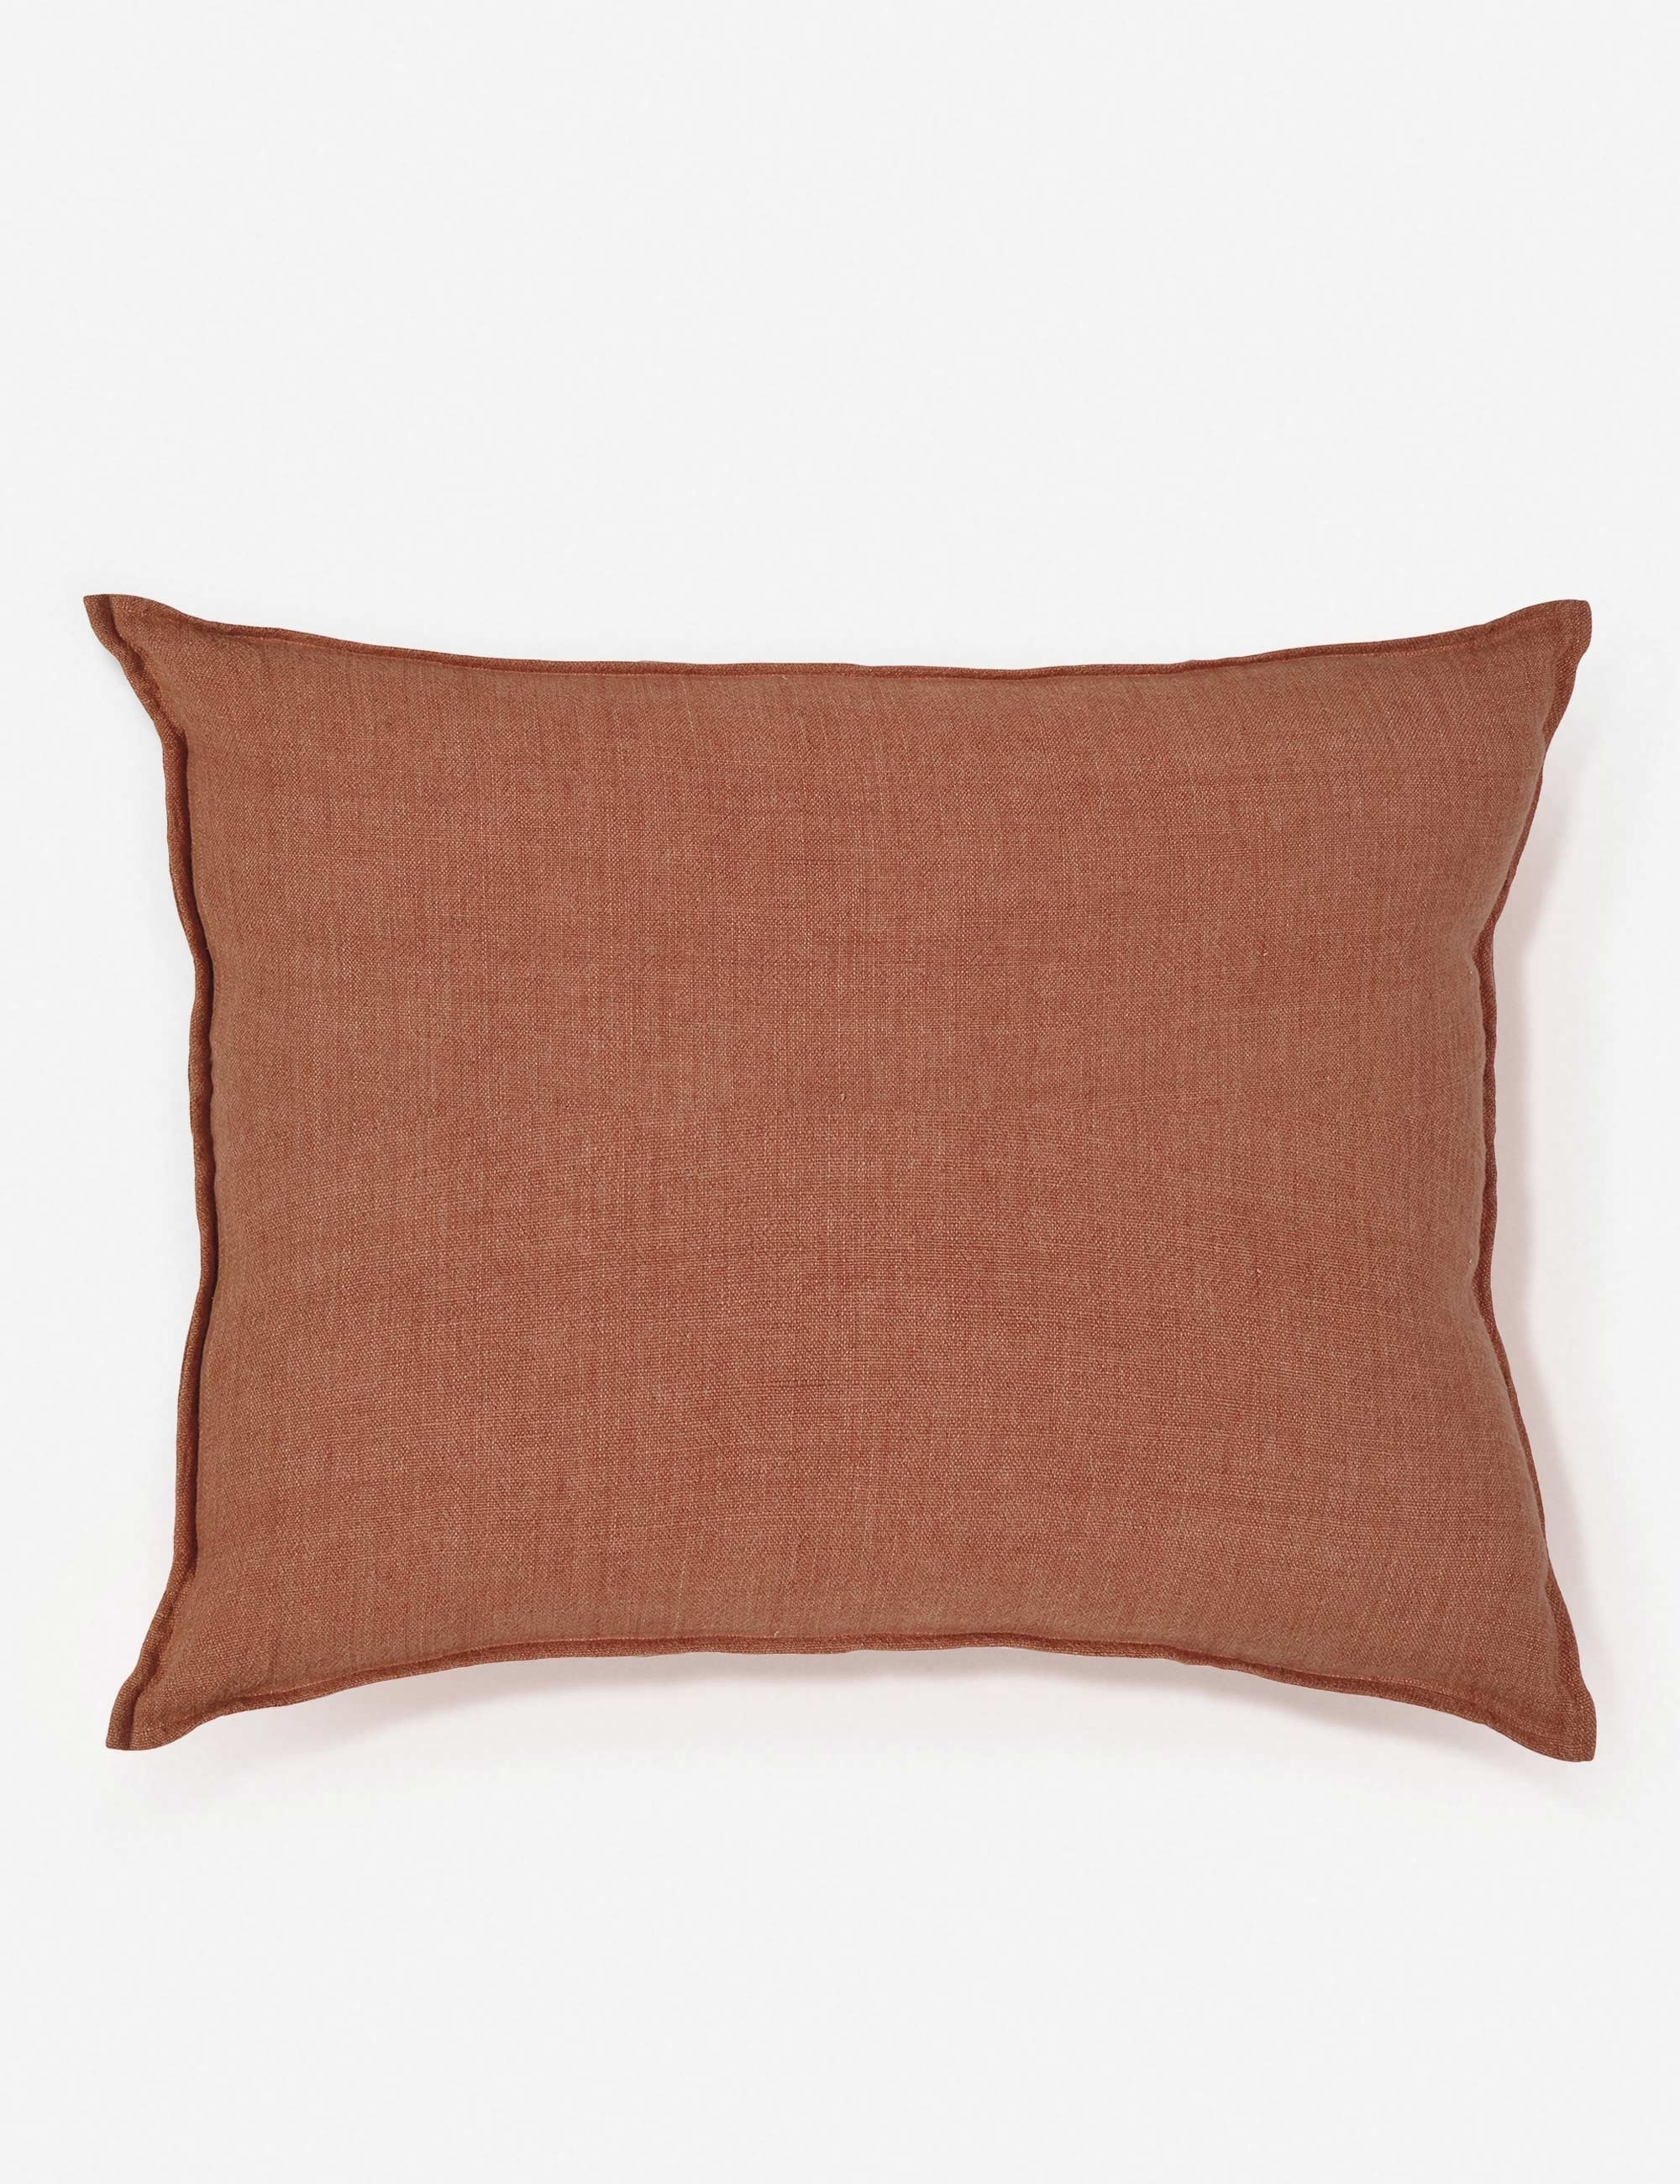 Montauk 28" x 36" Oversized Pillow, Terracotta by Pom Pom at Home - Image 0